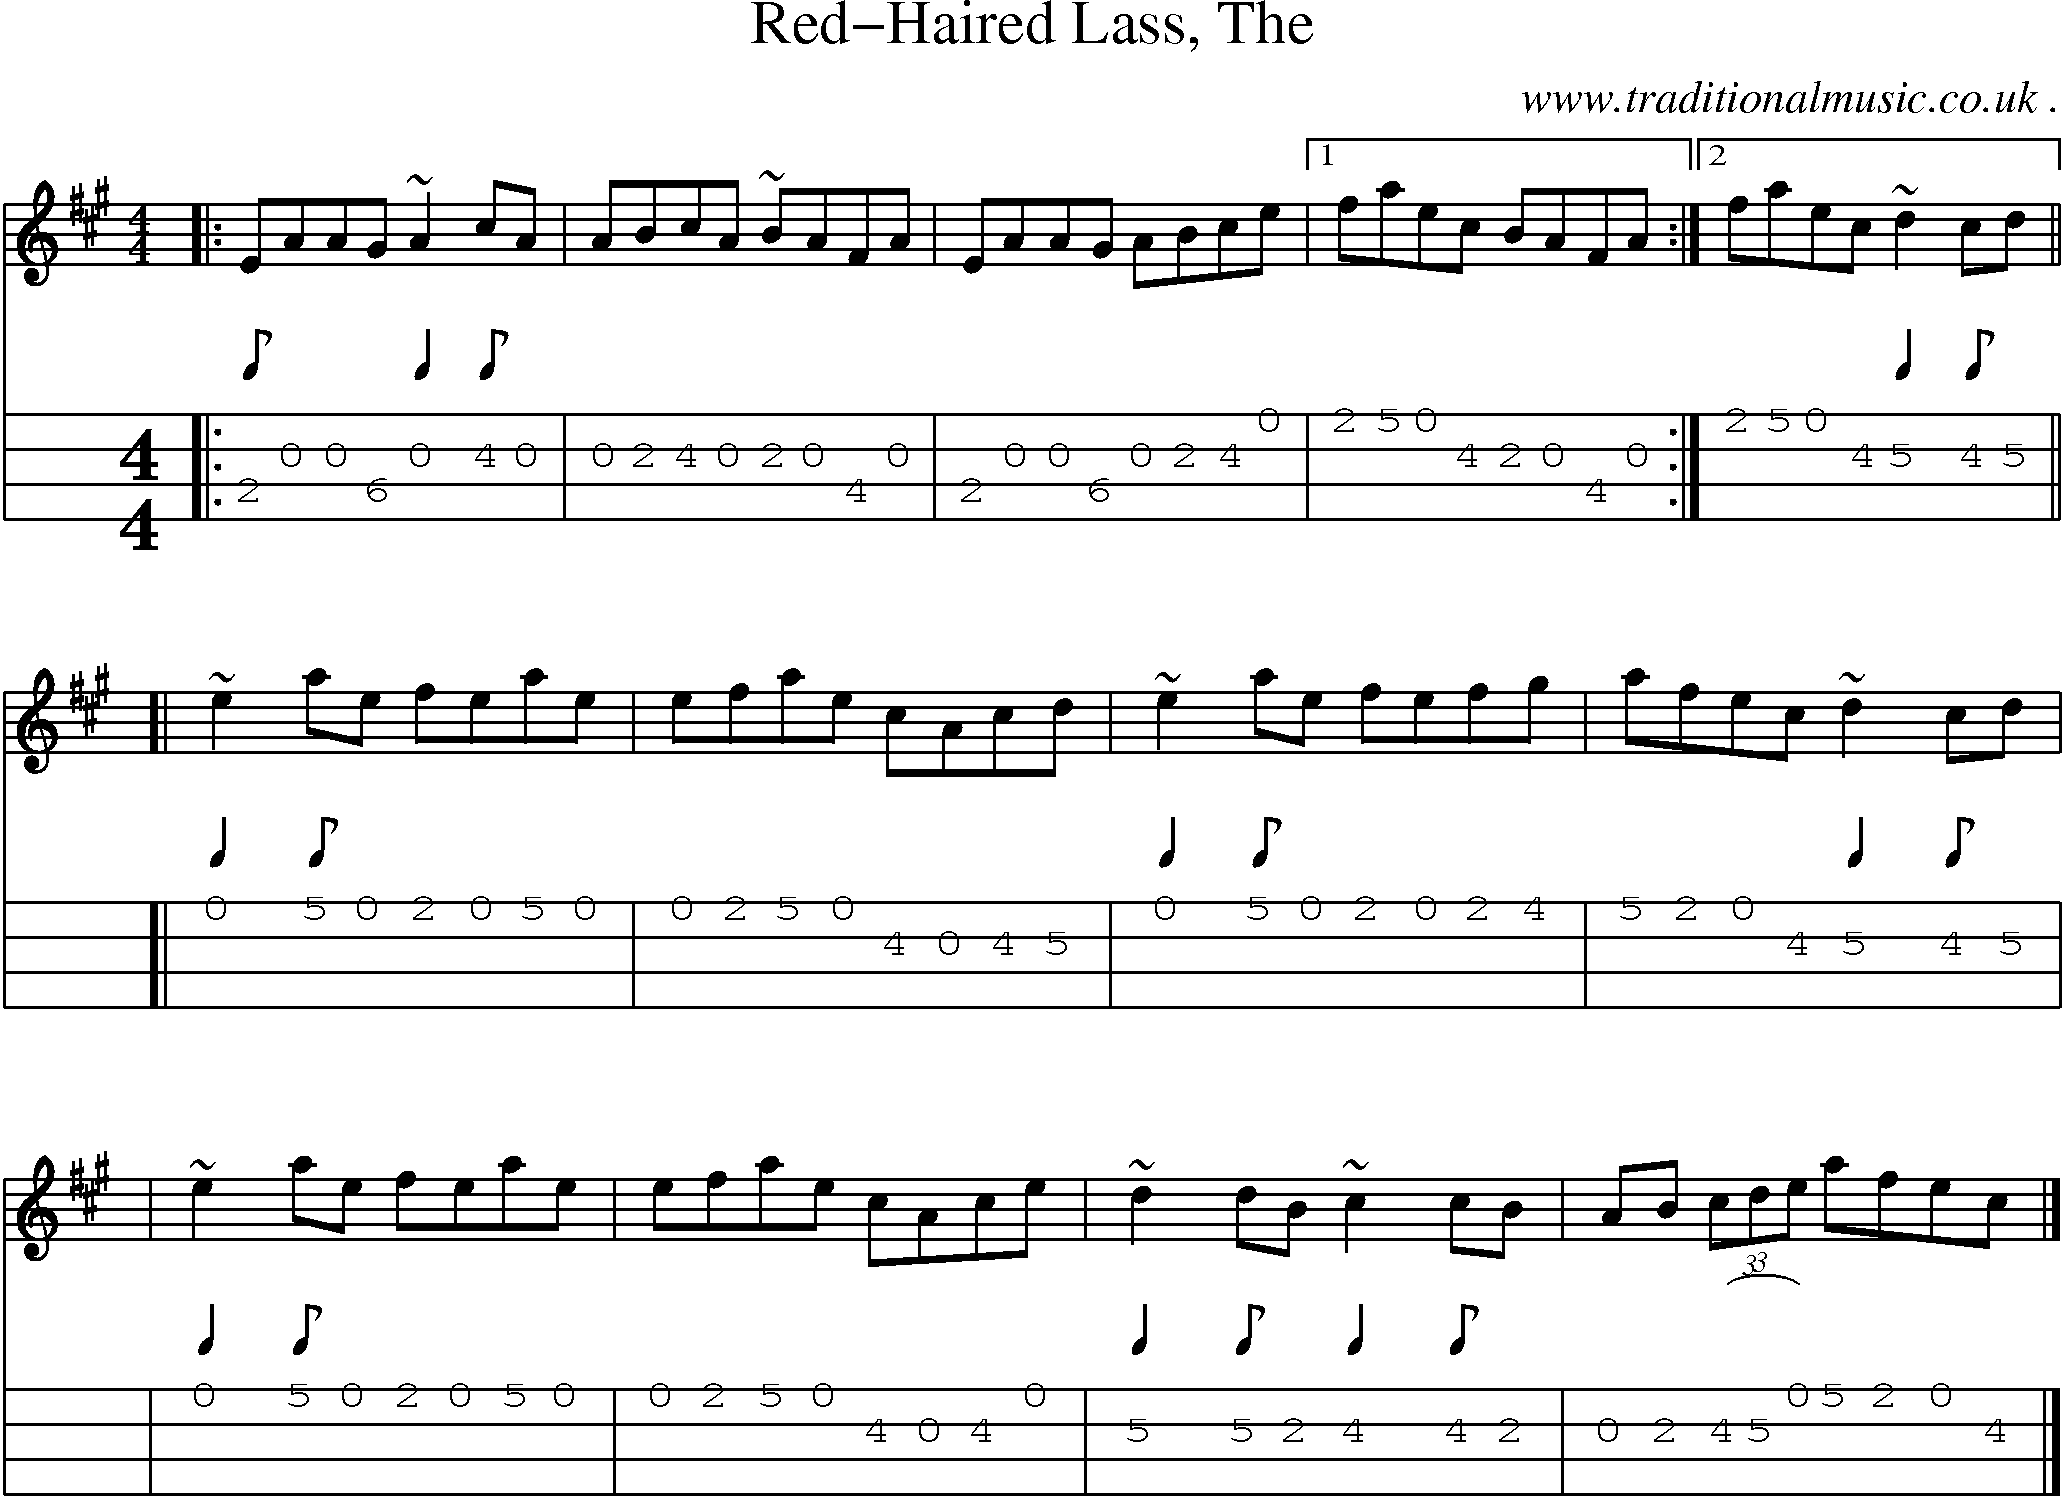 Sheet-music  score, Chords and Mandolin Tabs for Red-haired Lass The